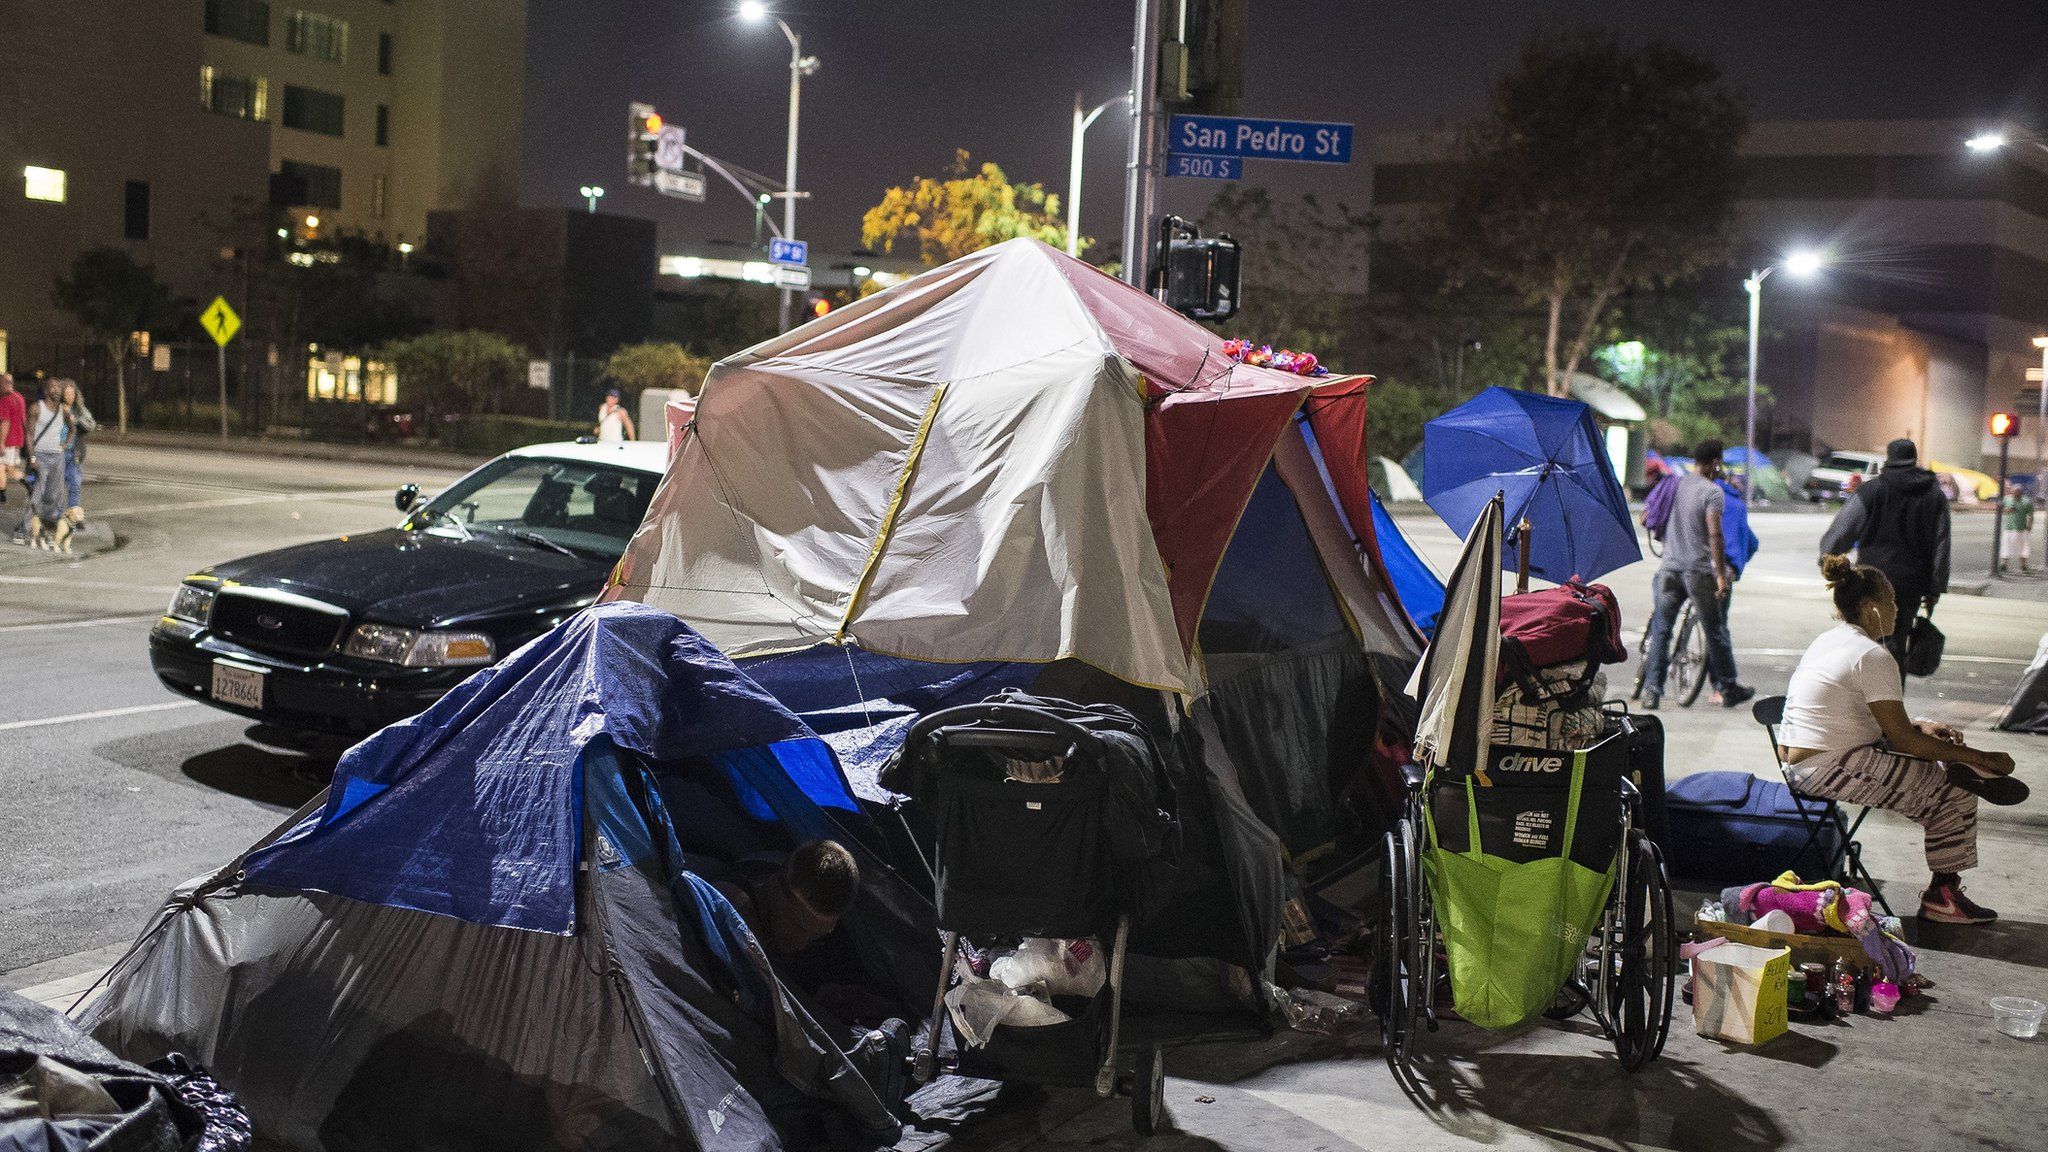 A police car stops beside tents on Skid Row in Los Angles, California, September 23, 2015